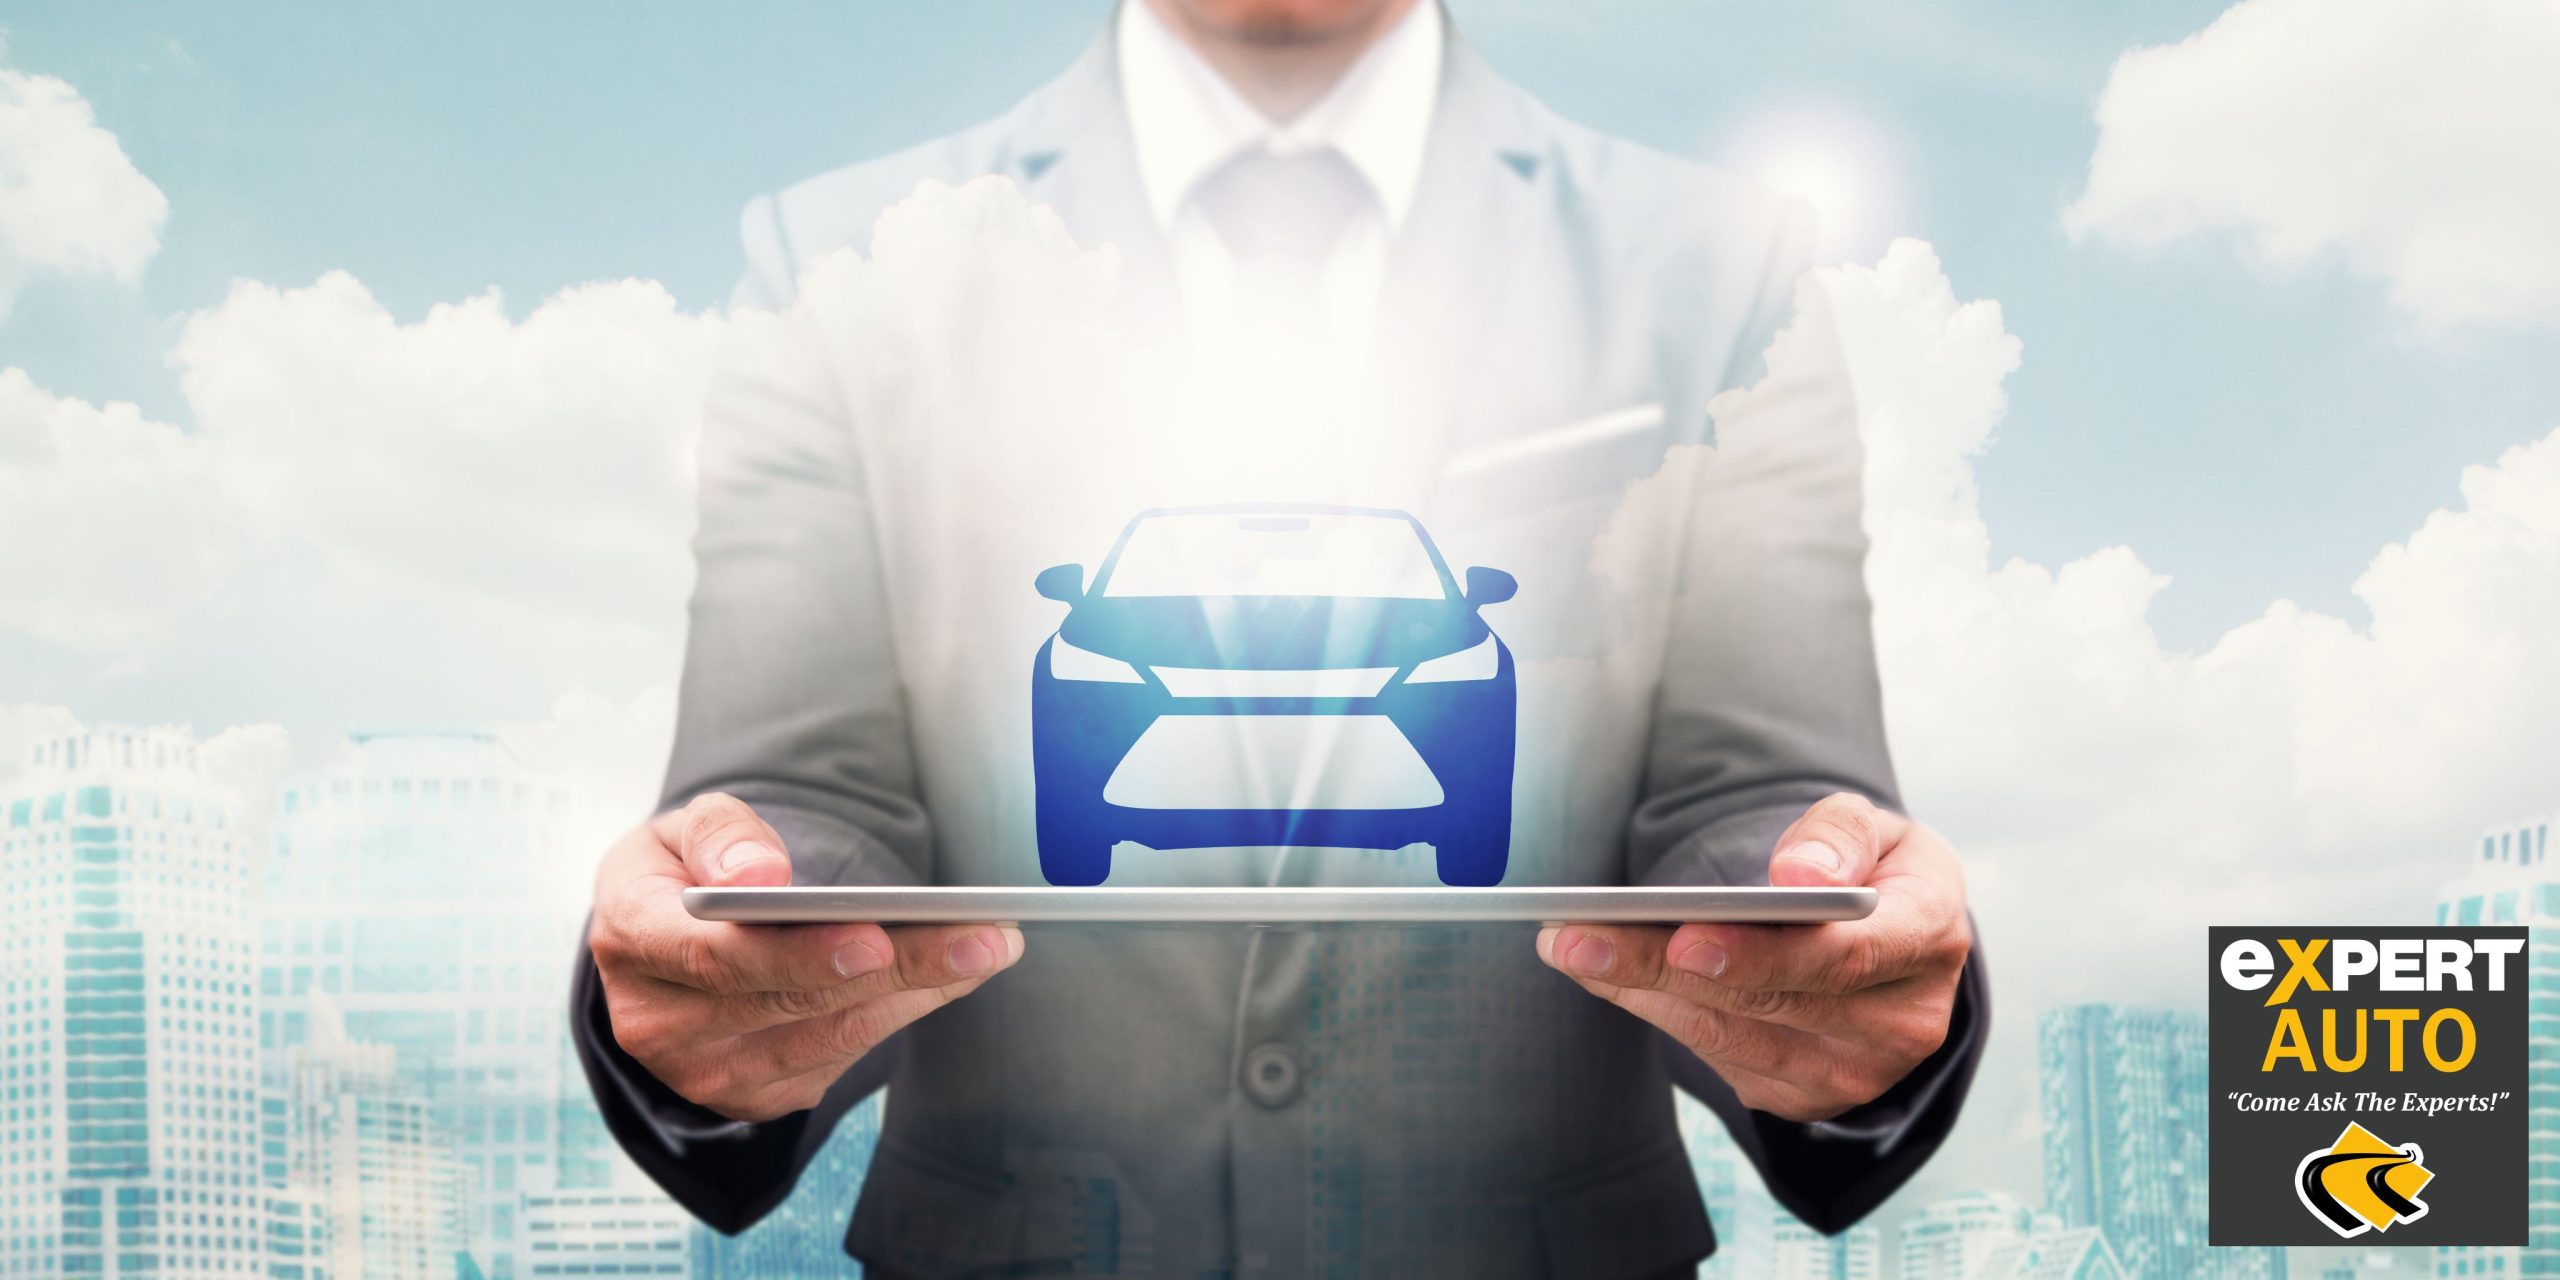 Rather Than Stressing About Auto Financing, See Expert Auto For Easy Loans